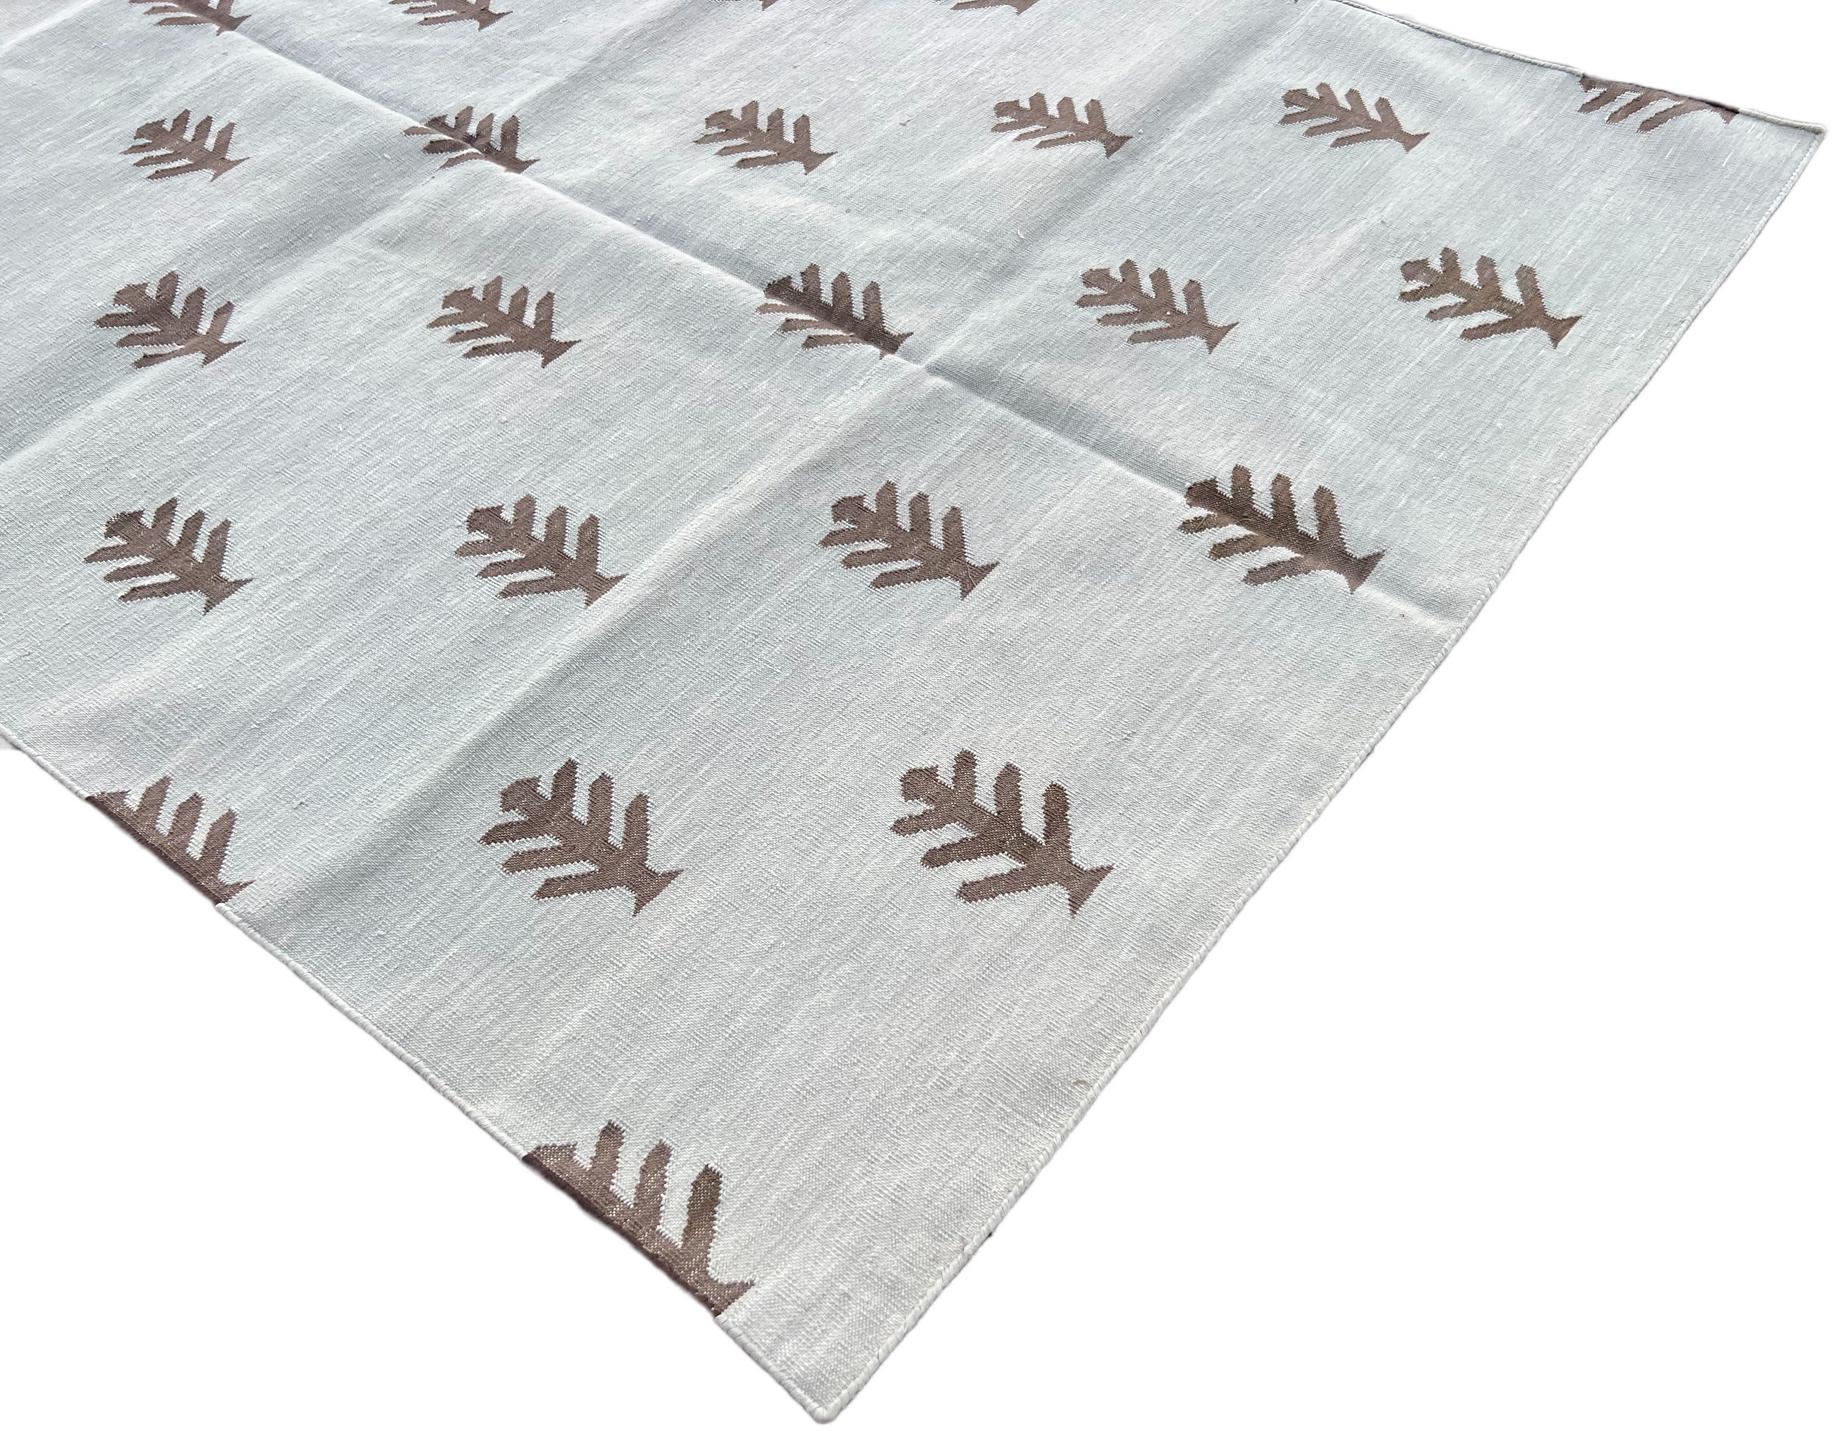 Hand-Woven Handmade Cotton Area Flat Weave Rug, Grey & Brown Tree Patterned Indian Dhurrie For Sale